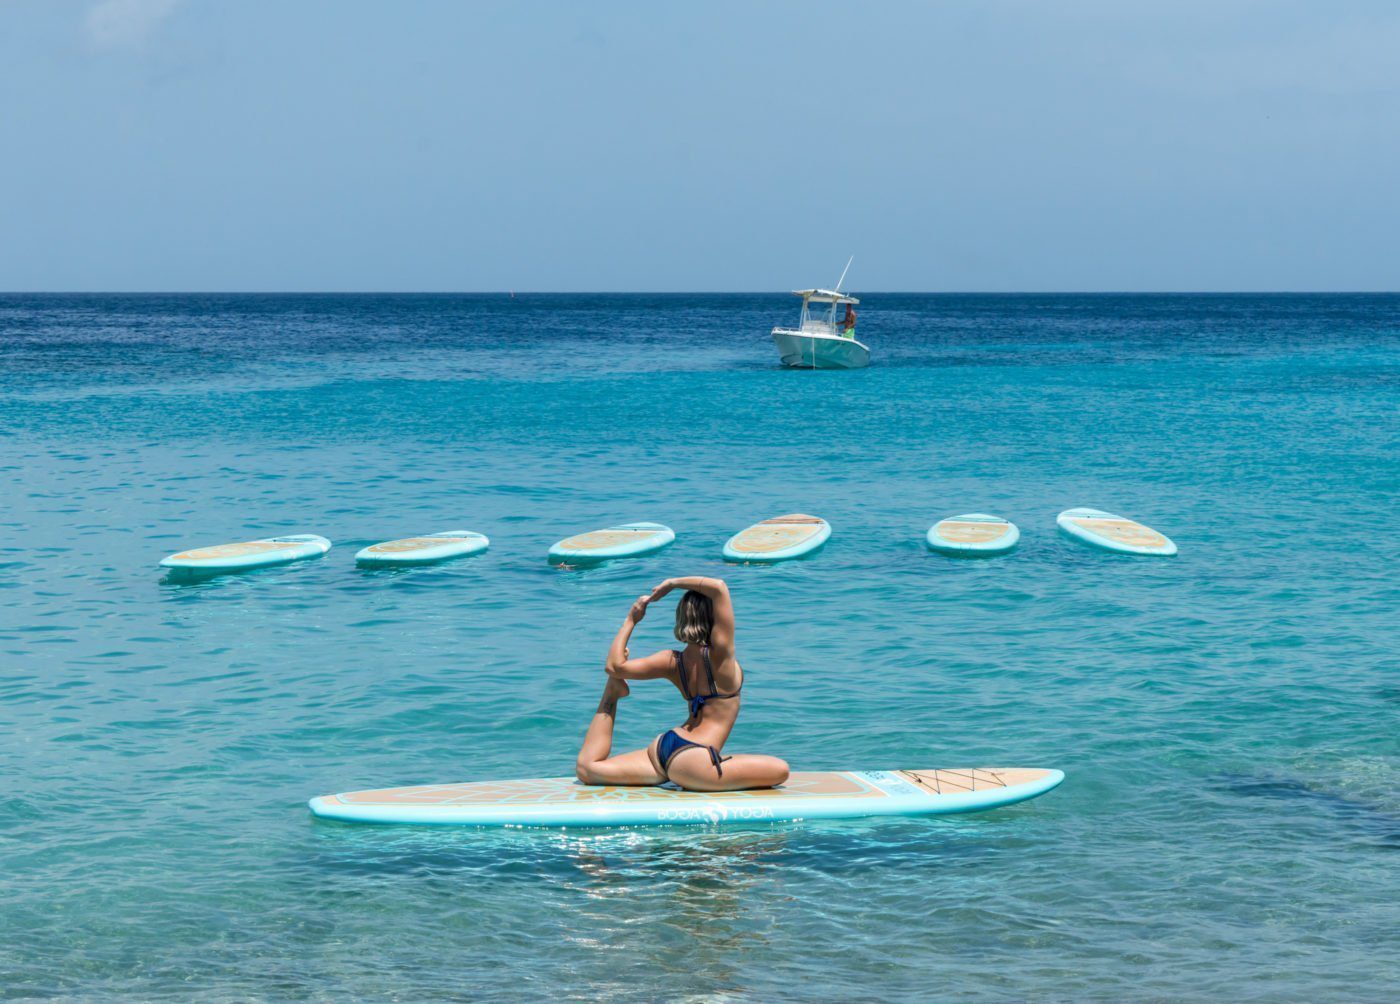 Liberty Suares from Dushi SUP doing SUP Yoga in Curaçao. Boga yoga boards